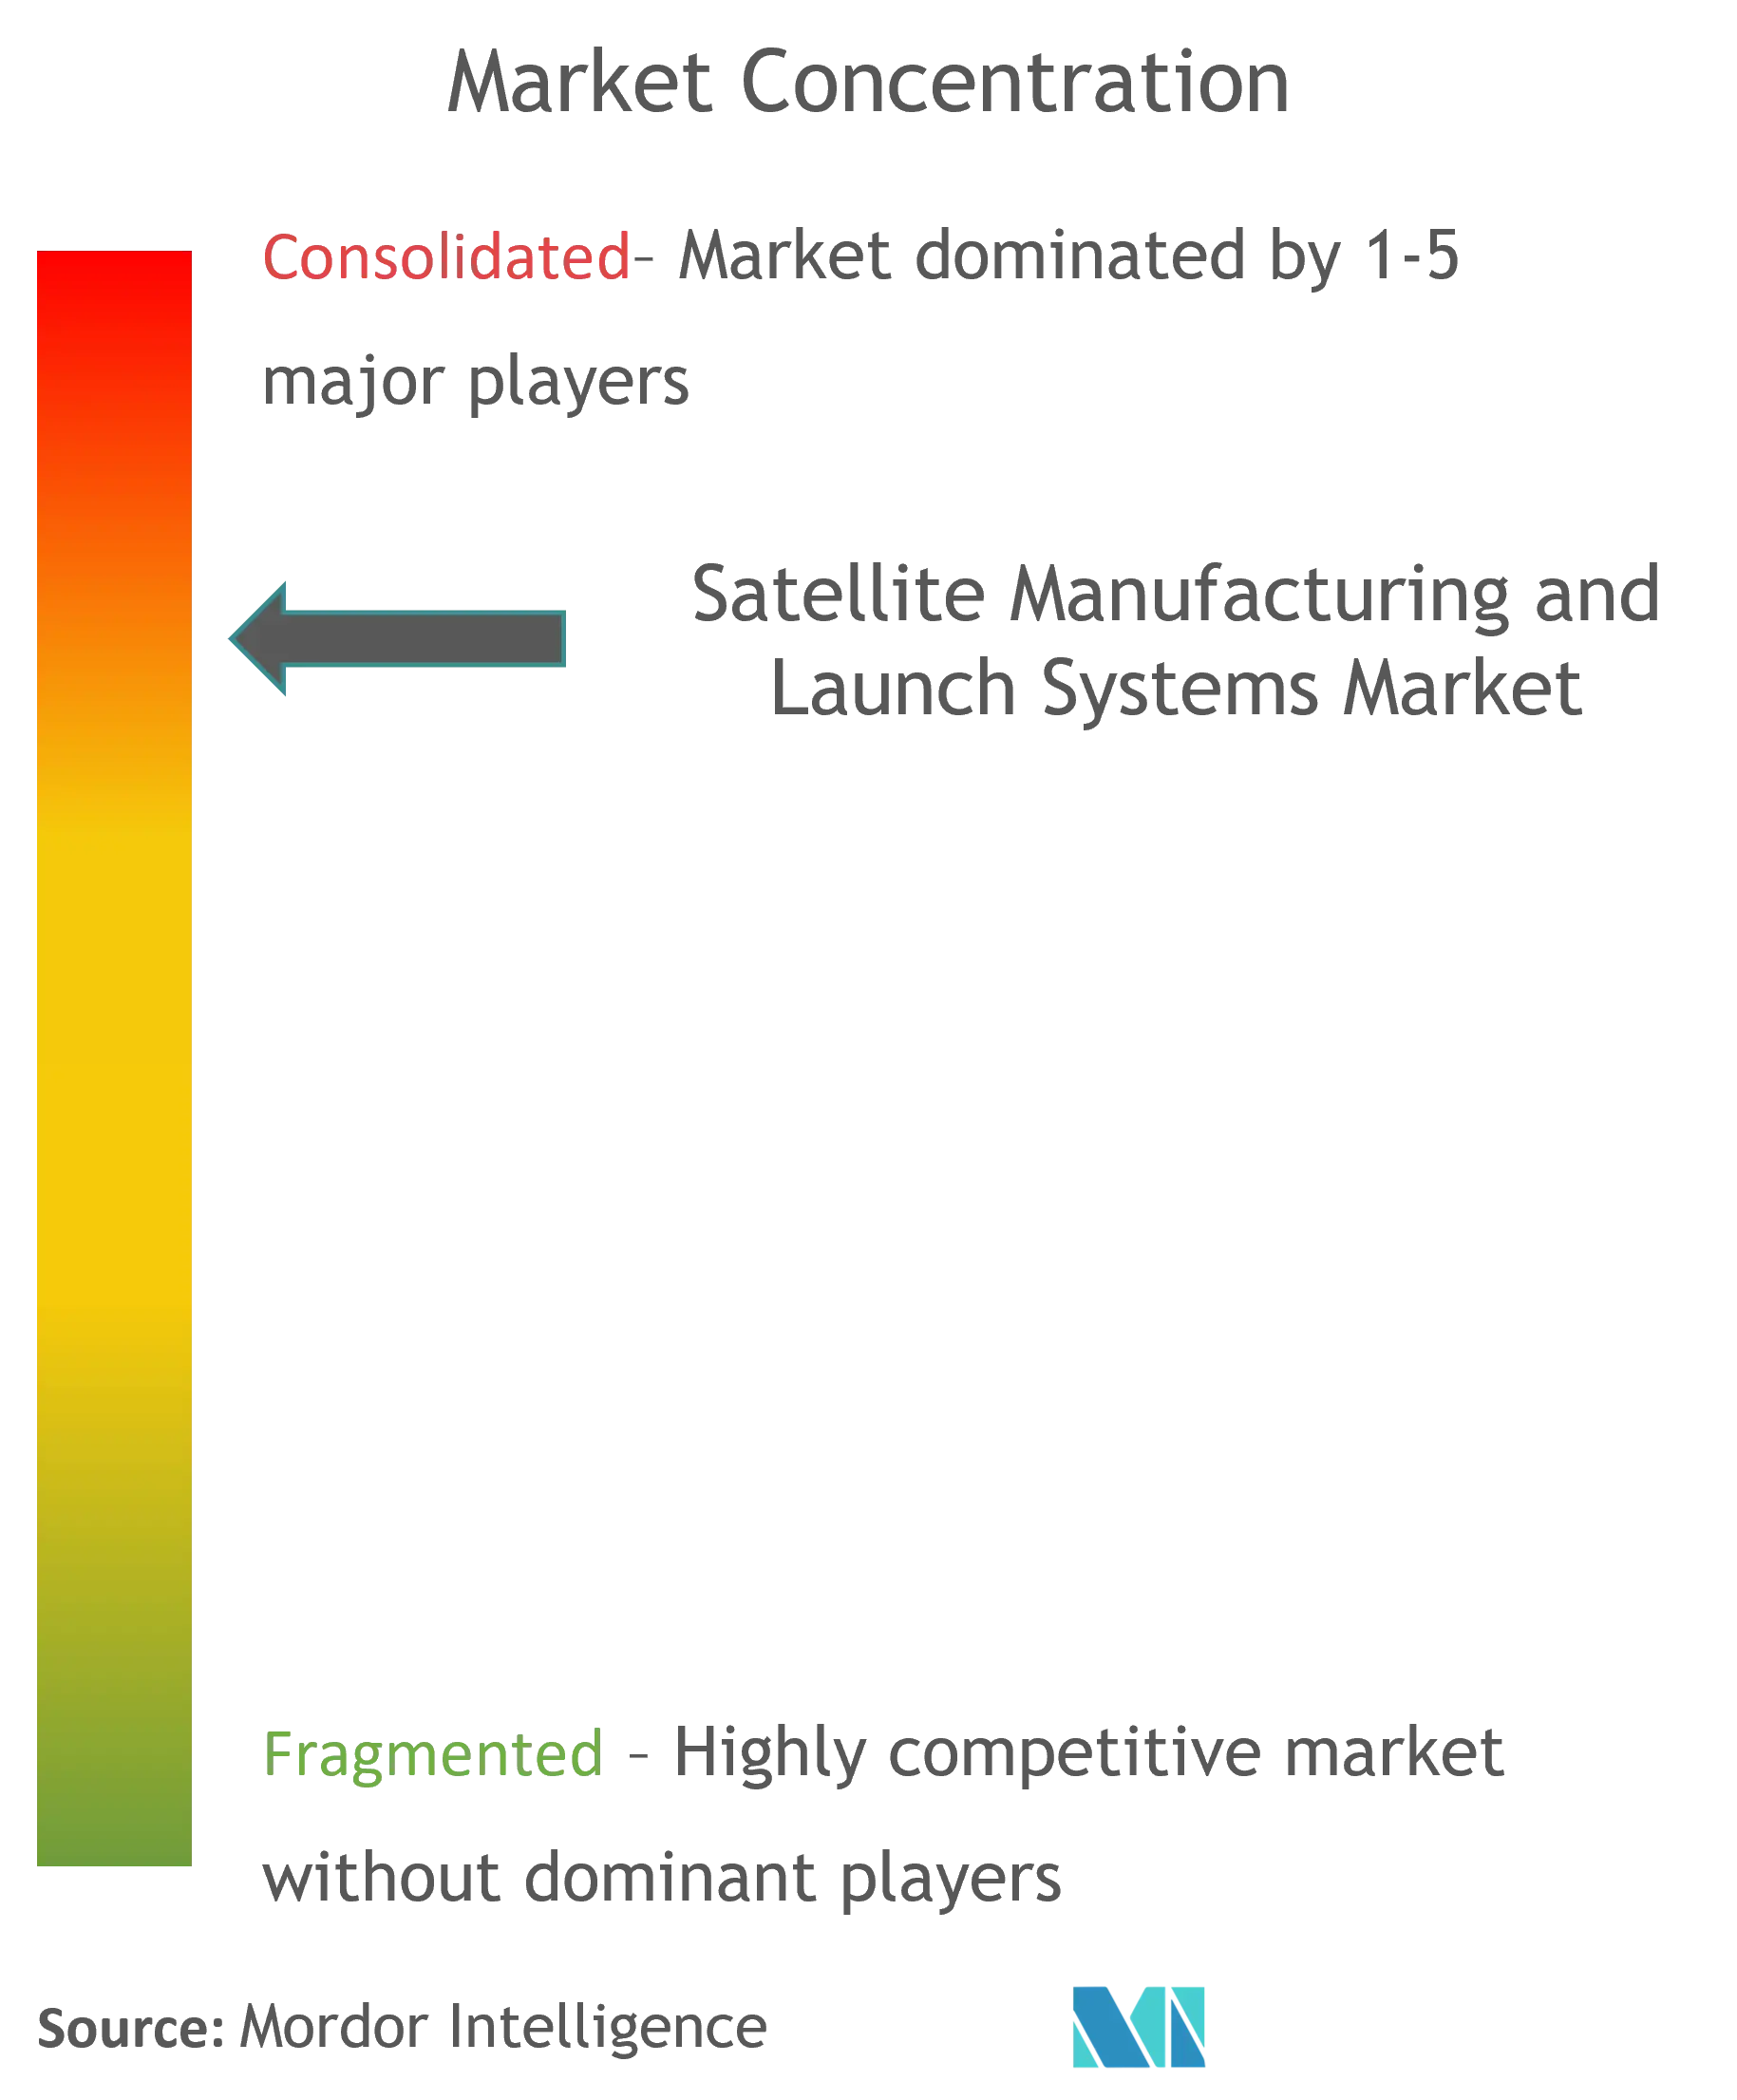 Satellite Manufacturing and Launch Systems Market Concentration